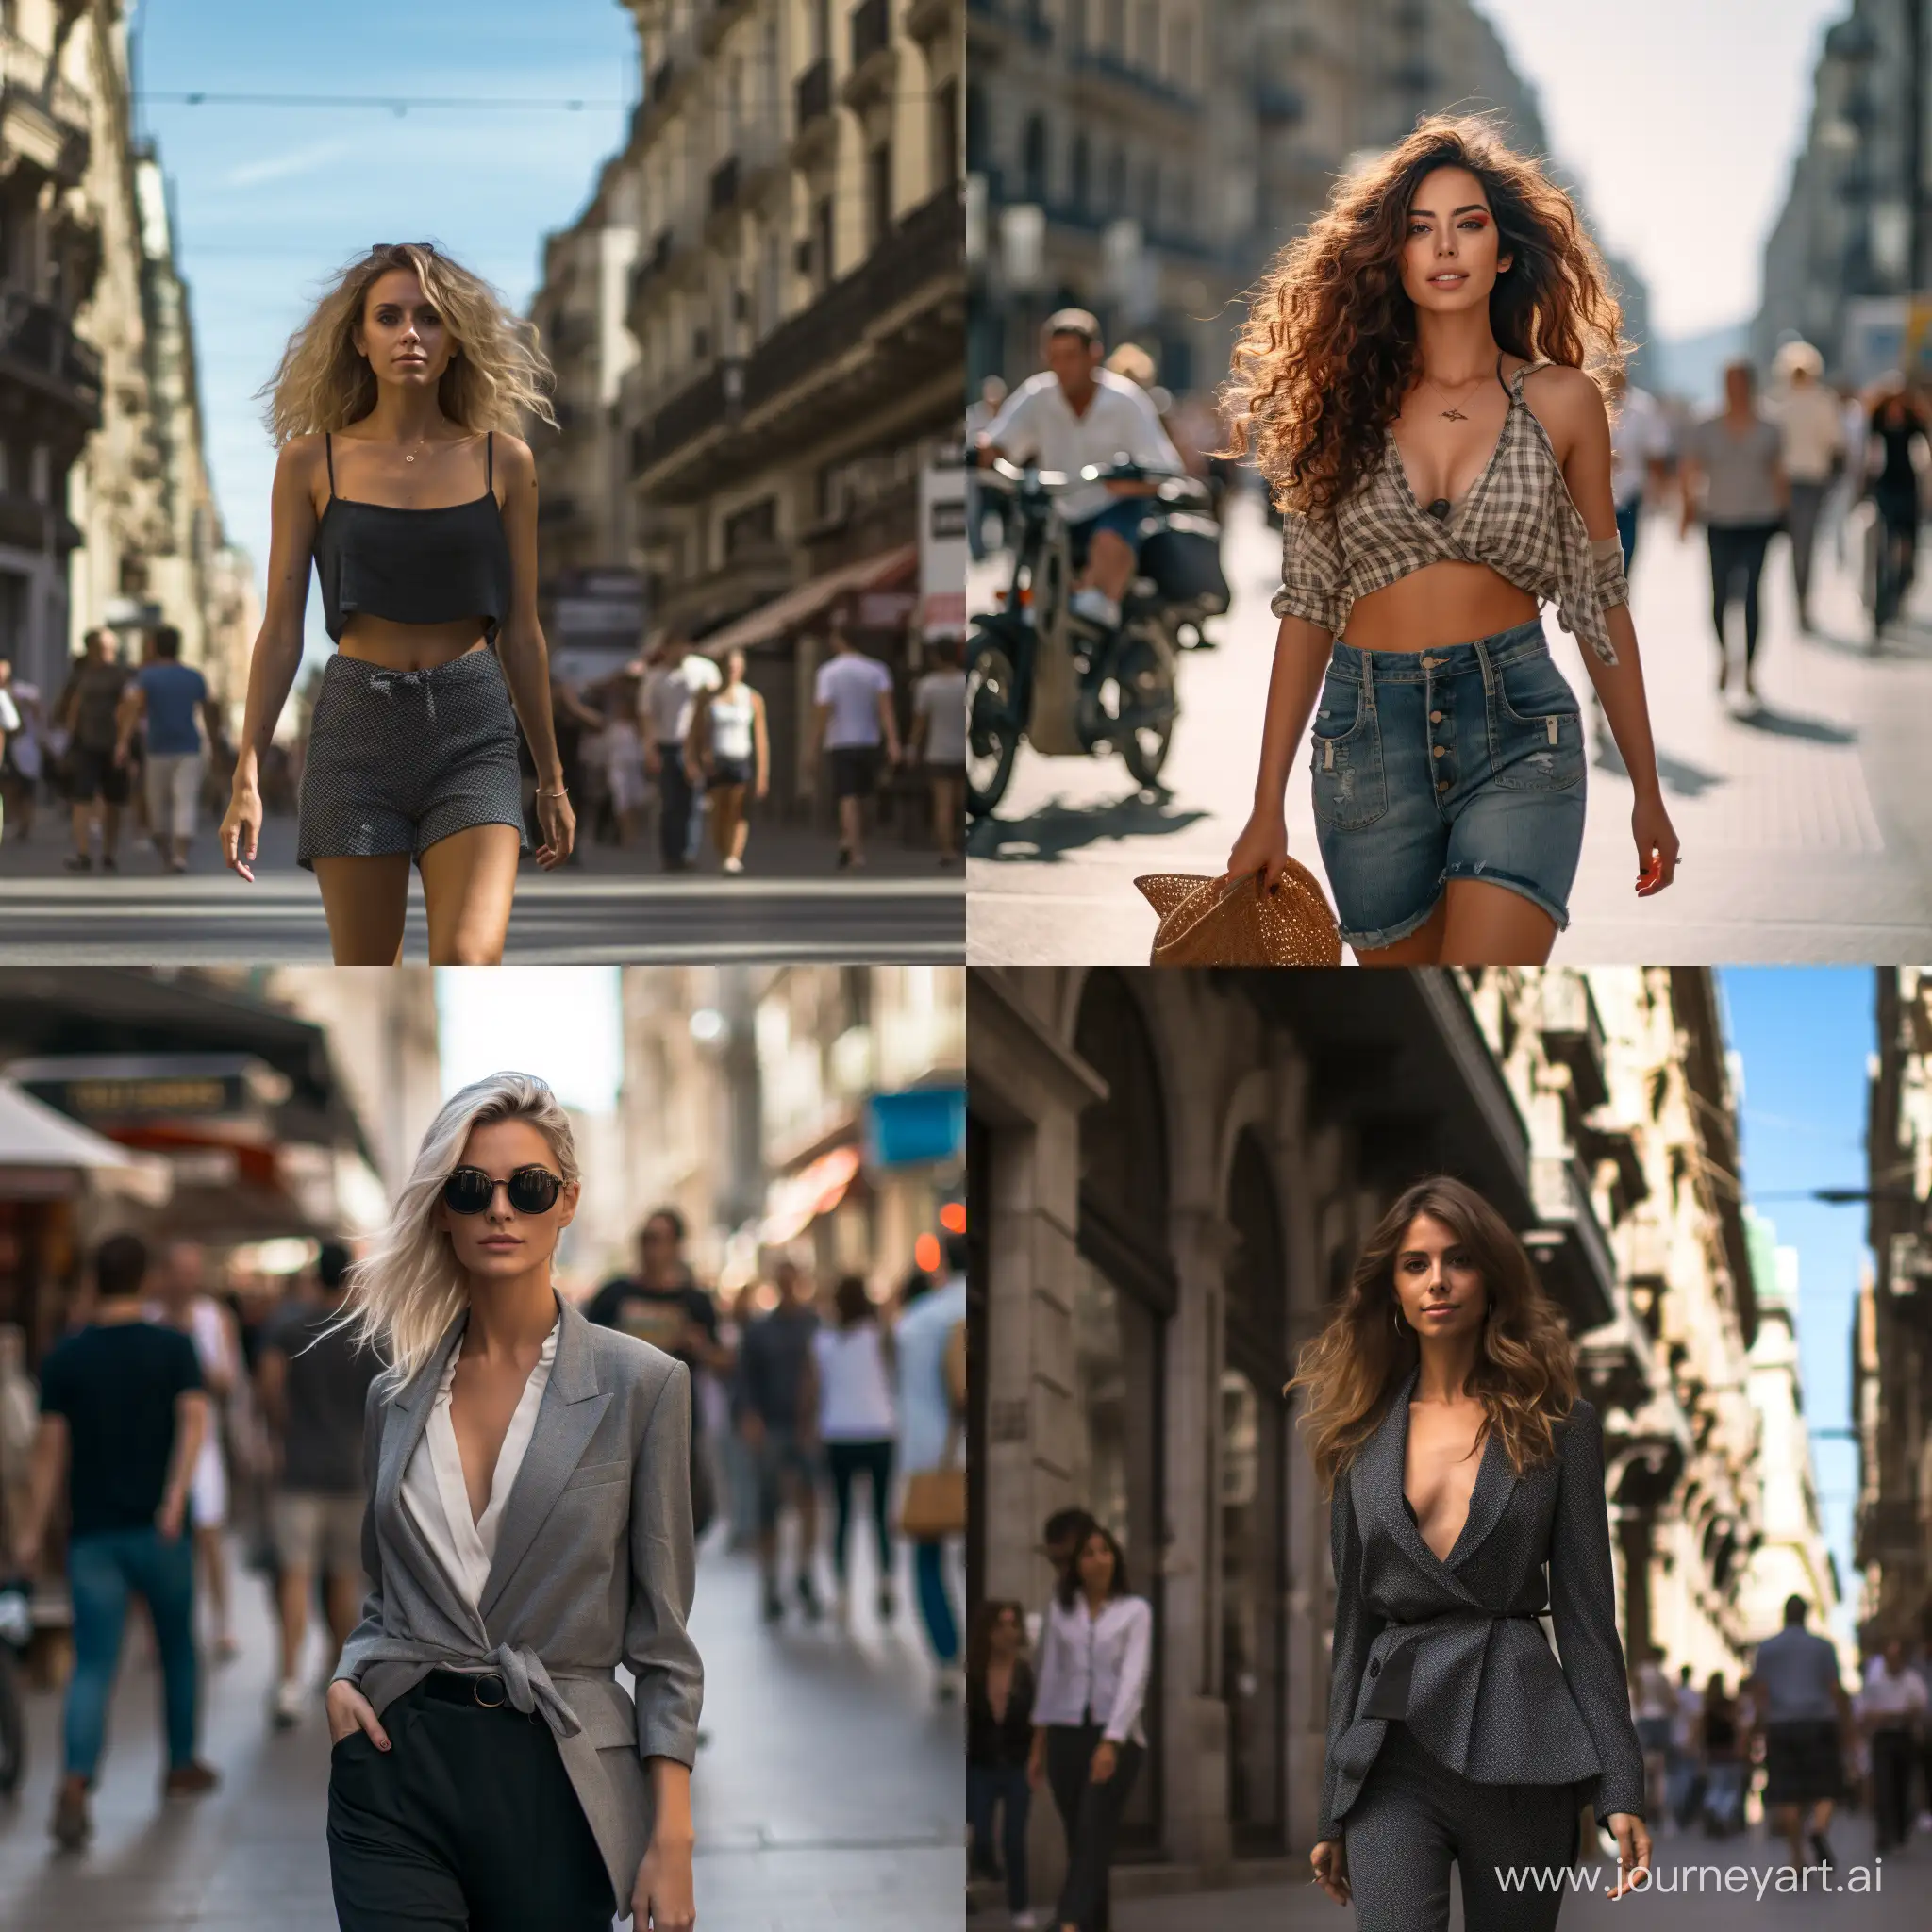 Hyper-Realistic-Urban-Photography-Full-Body-Woman-Strolling-the-Streets-of-Barcelona